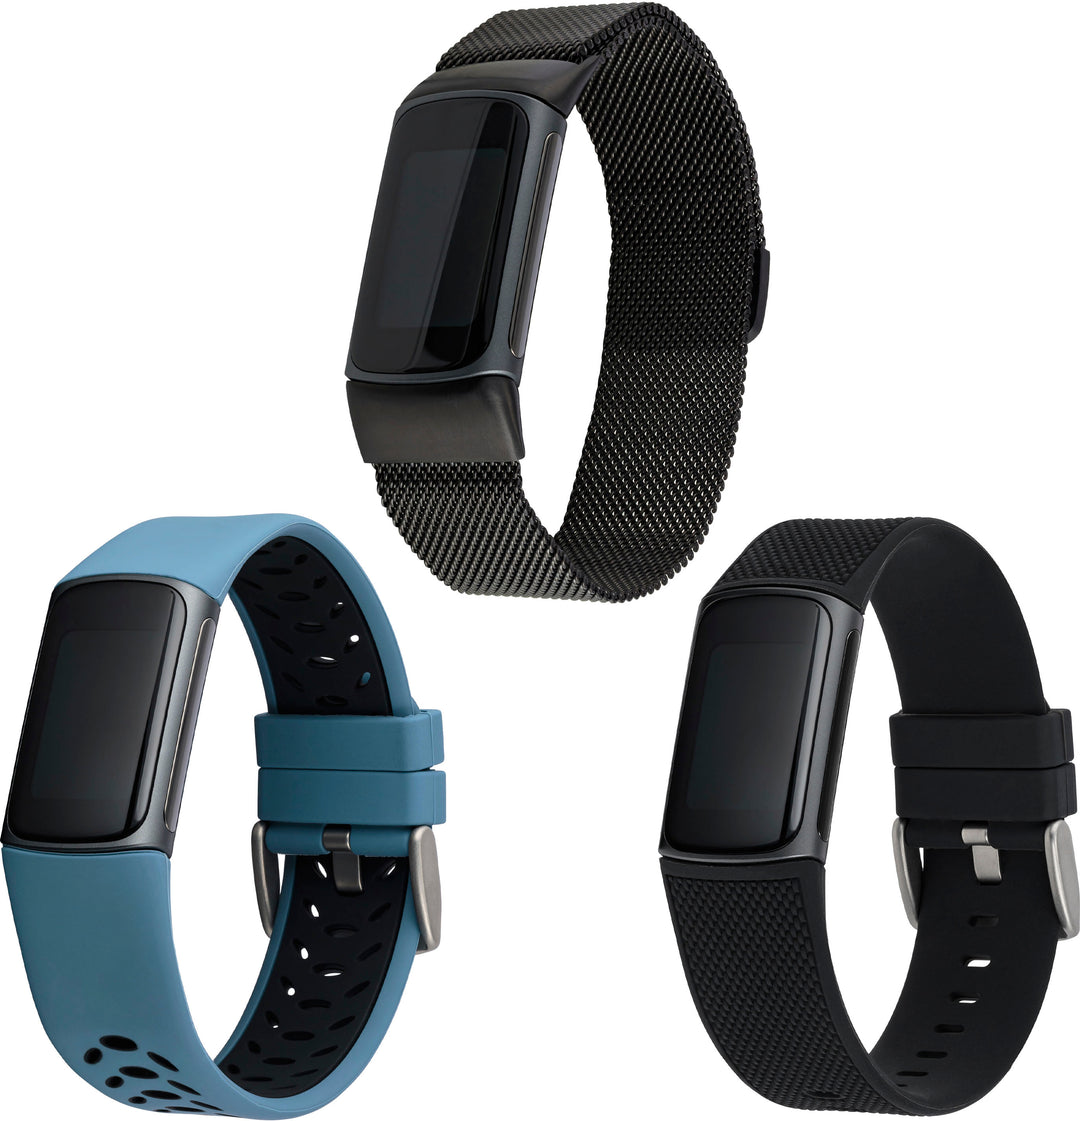 WITHit - Fitbit Charge 5 3-pack (black mesh, bluestone sport and black woven) - Woven Black/Bluestone/Black_0